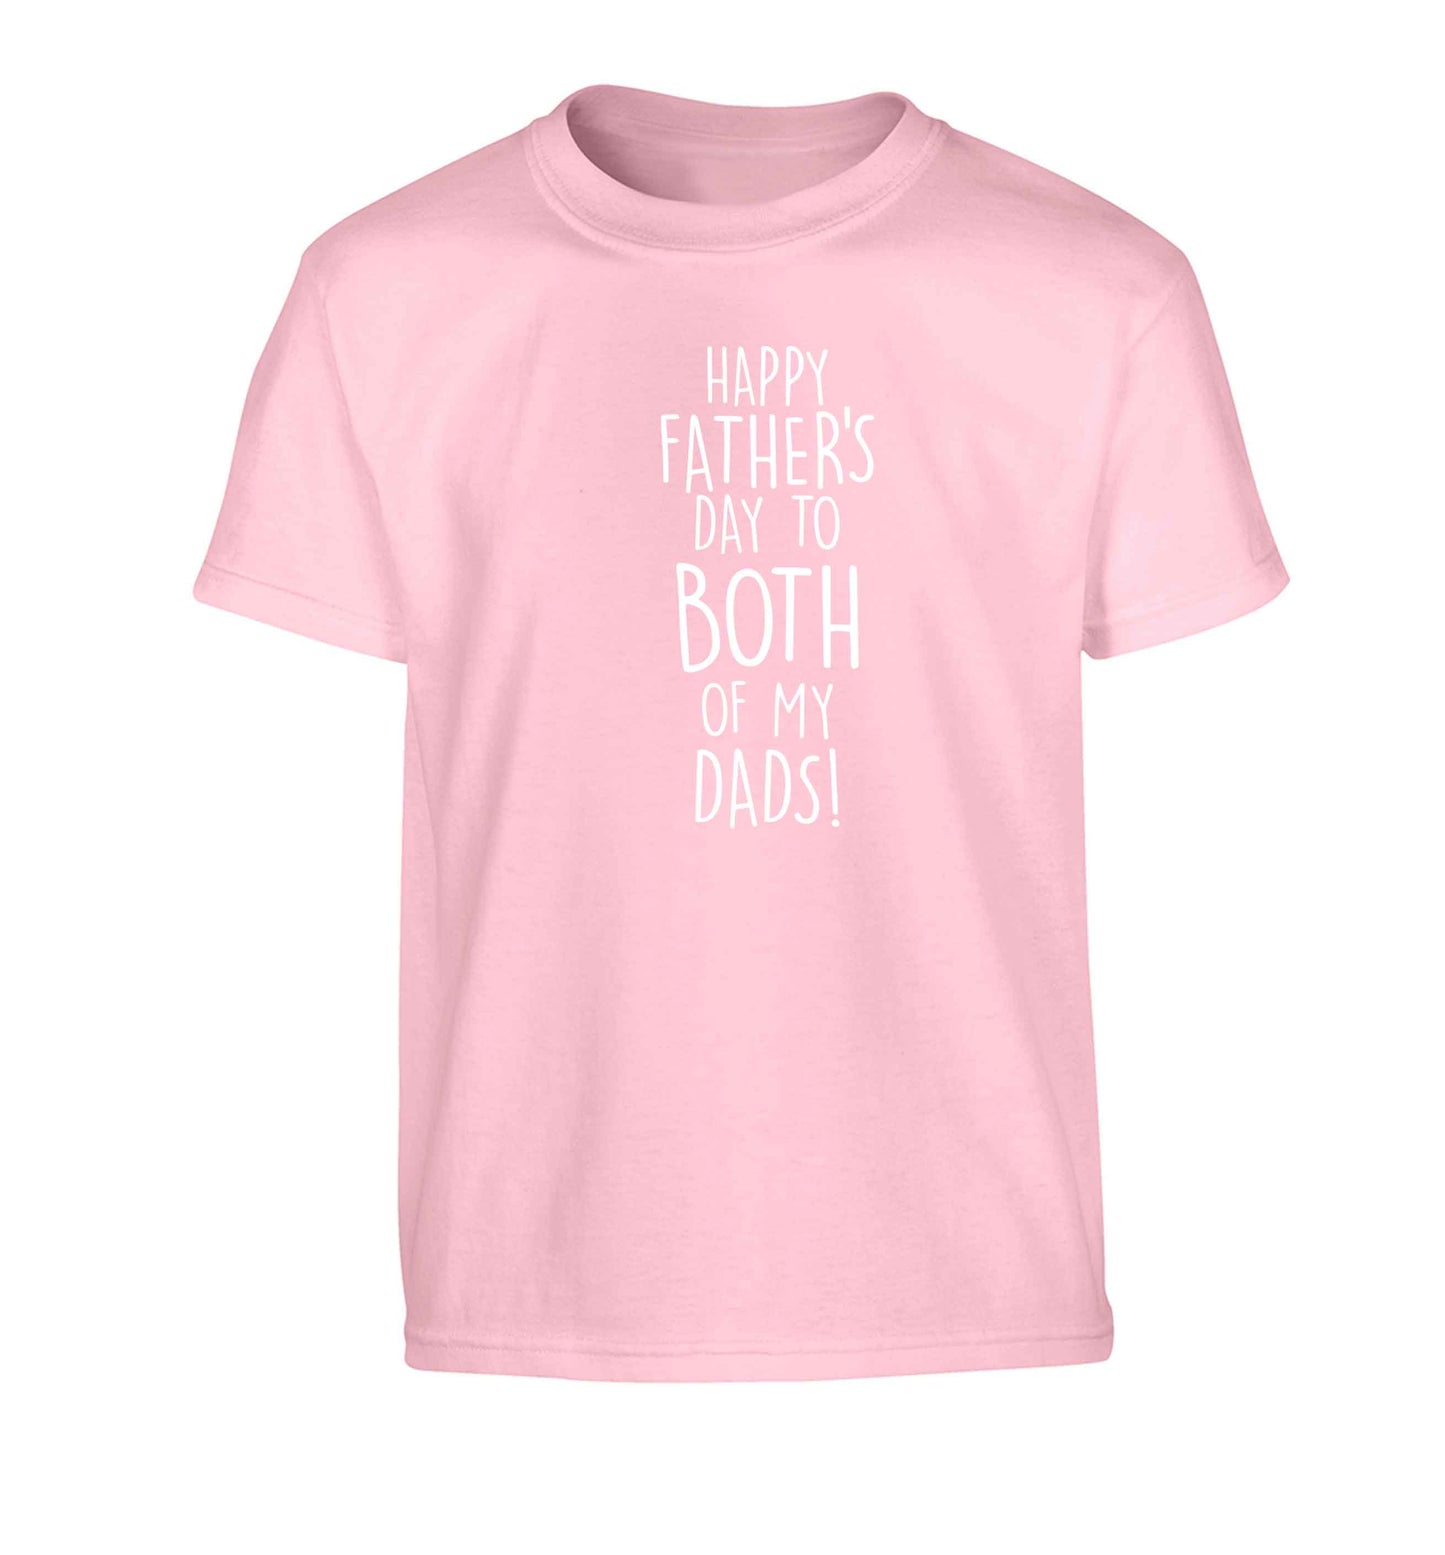 Happy Father's day to both of my dads Children's light pink Tshirt 12-13 Years